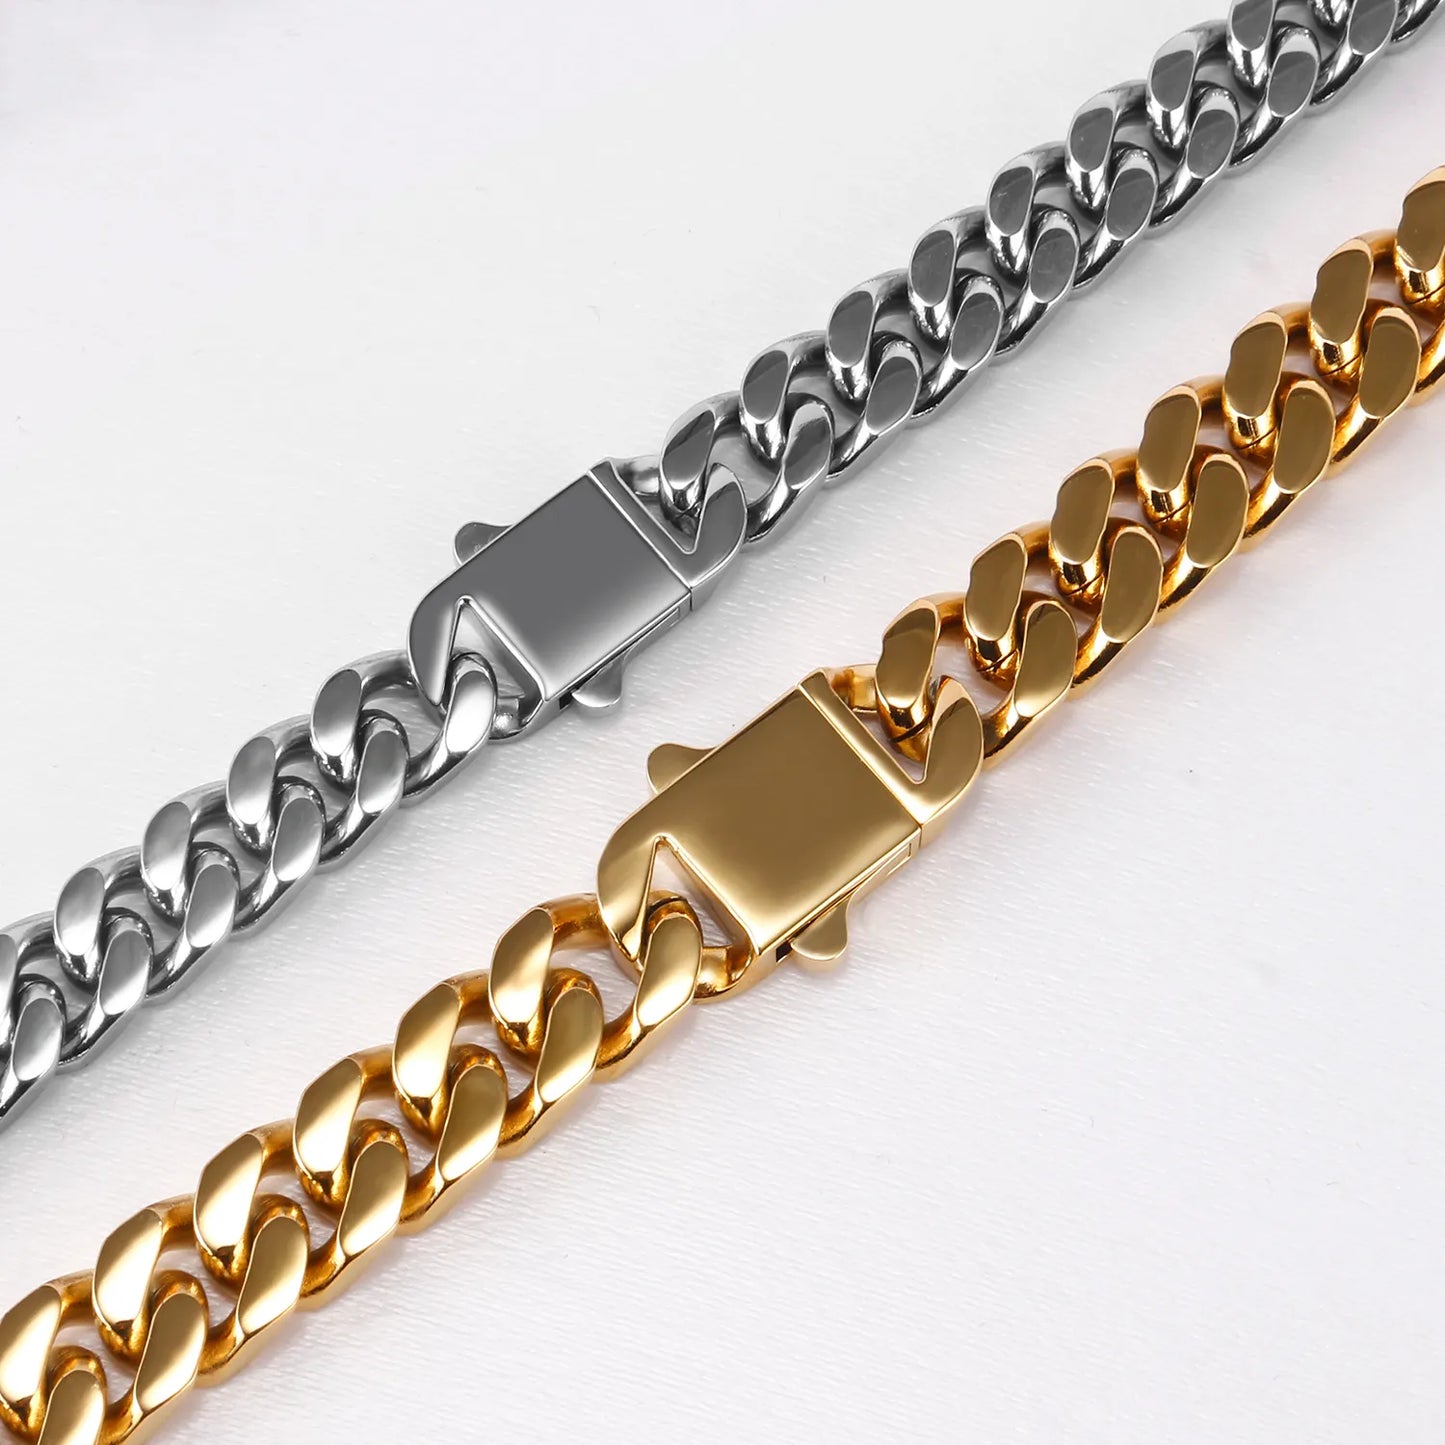 Stainless Steel Chain Necklace Bracelet